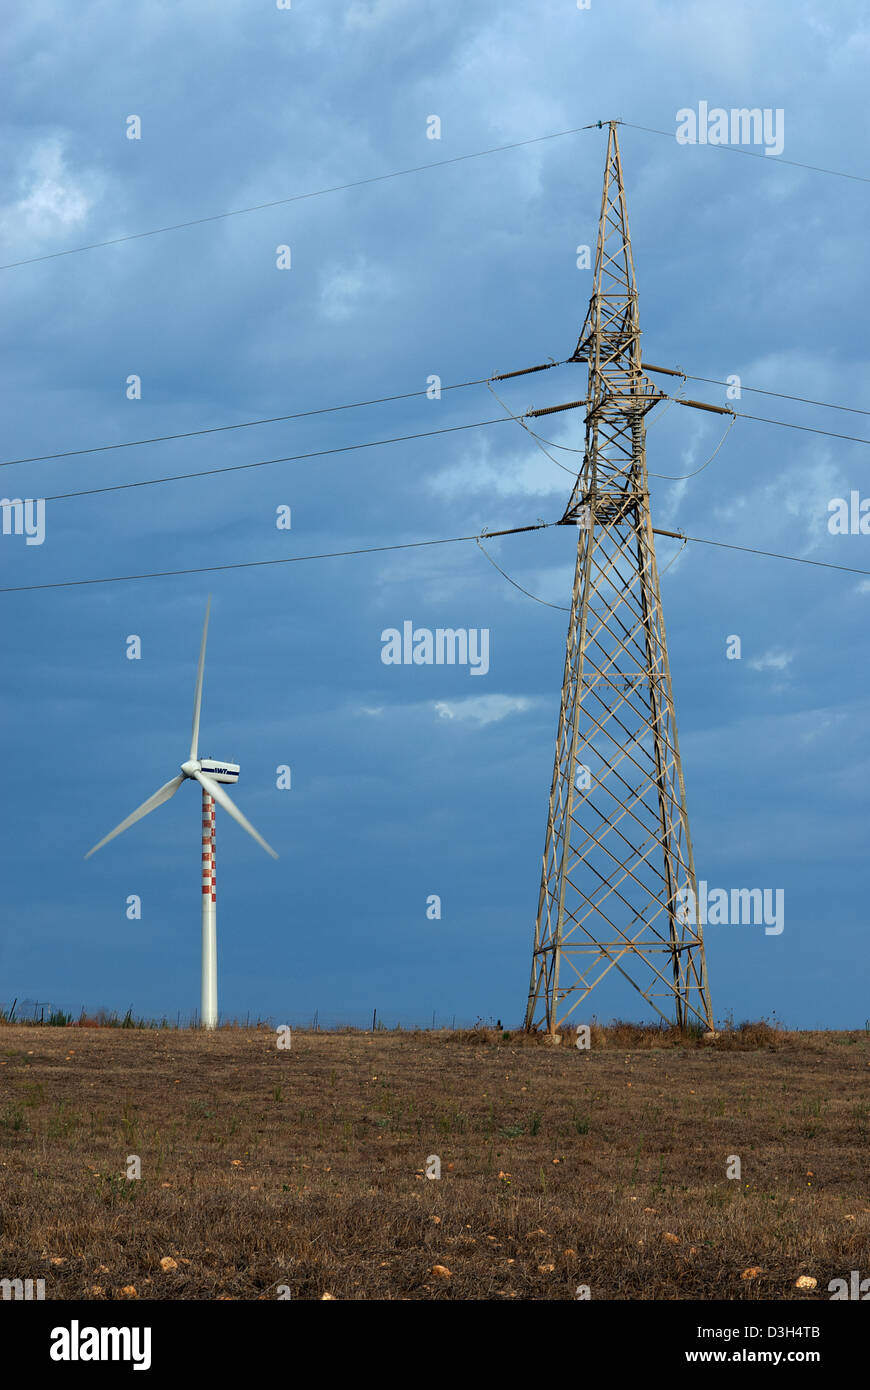 Porto Torres, Italy, power pole and the power utility Enel SpA Windmill Stock Photo